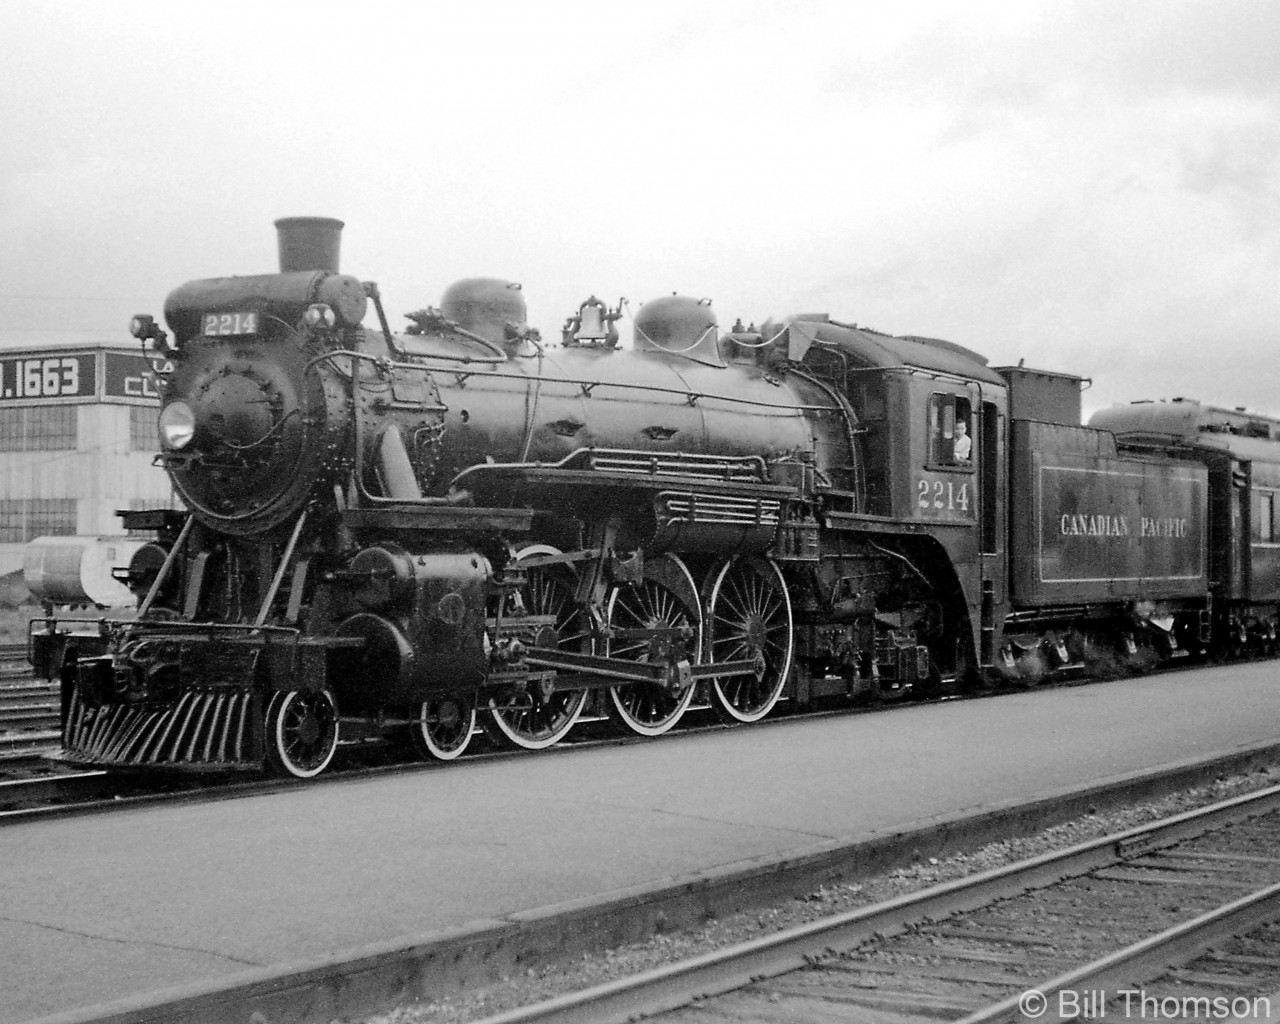 CP G1 "Pacific" 4-6-2 2214 was the power for the NMRA Niagara chapter convention's train in October 1959, that went up the Don Valley to Leaside, and across the North Toronto Sub to Lambton Yard. After turning, 2214 is posed at Leaside before heading west to Lambton Yard with her train.

Some of the power that day CP put on display at Lambton Yard were CPR D10 1092, Mikado 5102, and Royal Hudson 2858.